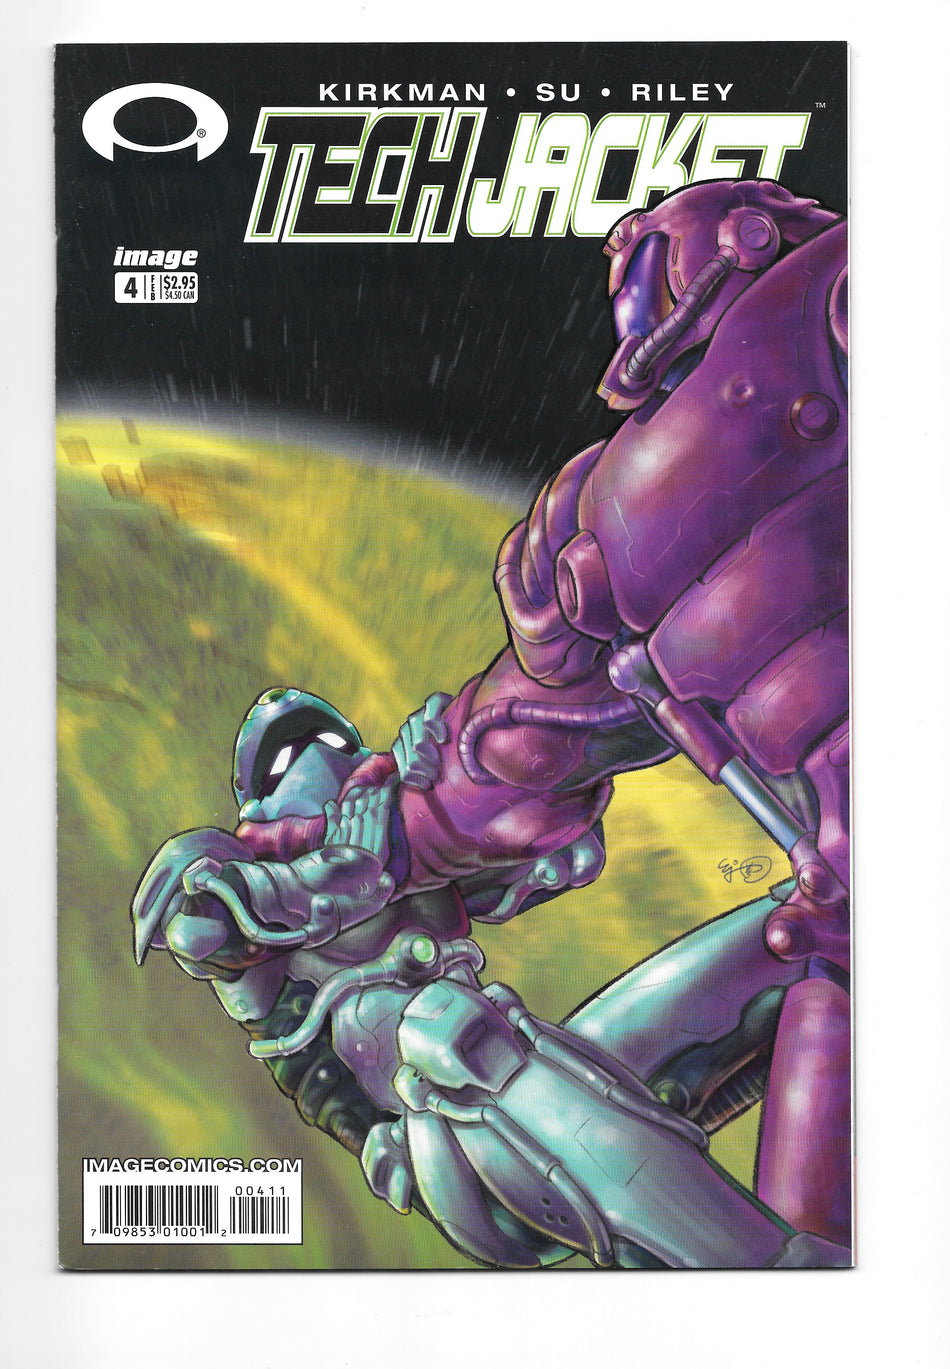 Photo of Tech Jacket, Vol. 1 (2003)  Iss 4   Comic sold by Stronghold Collectibles